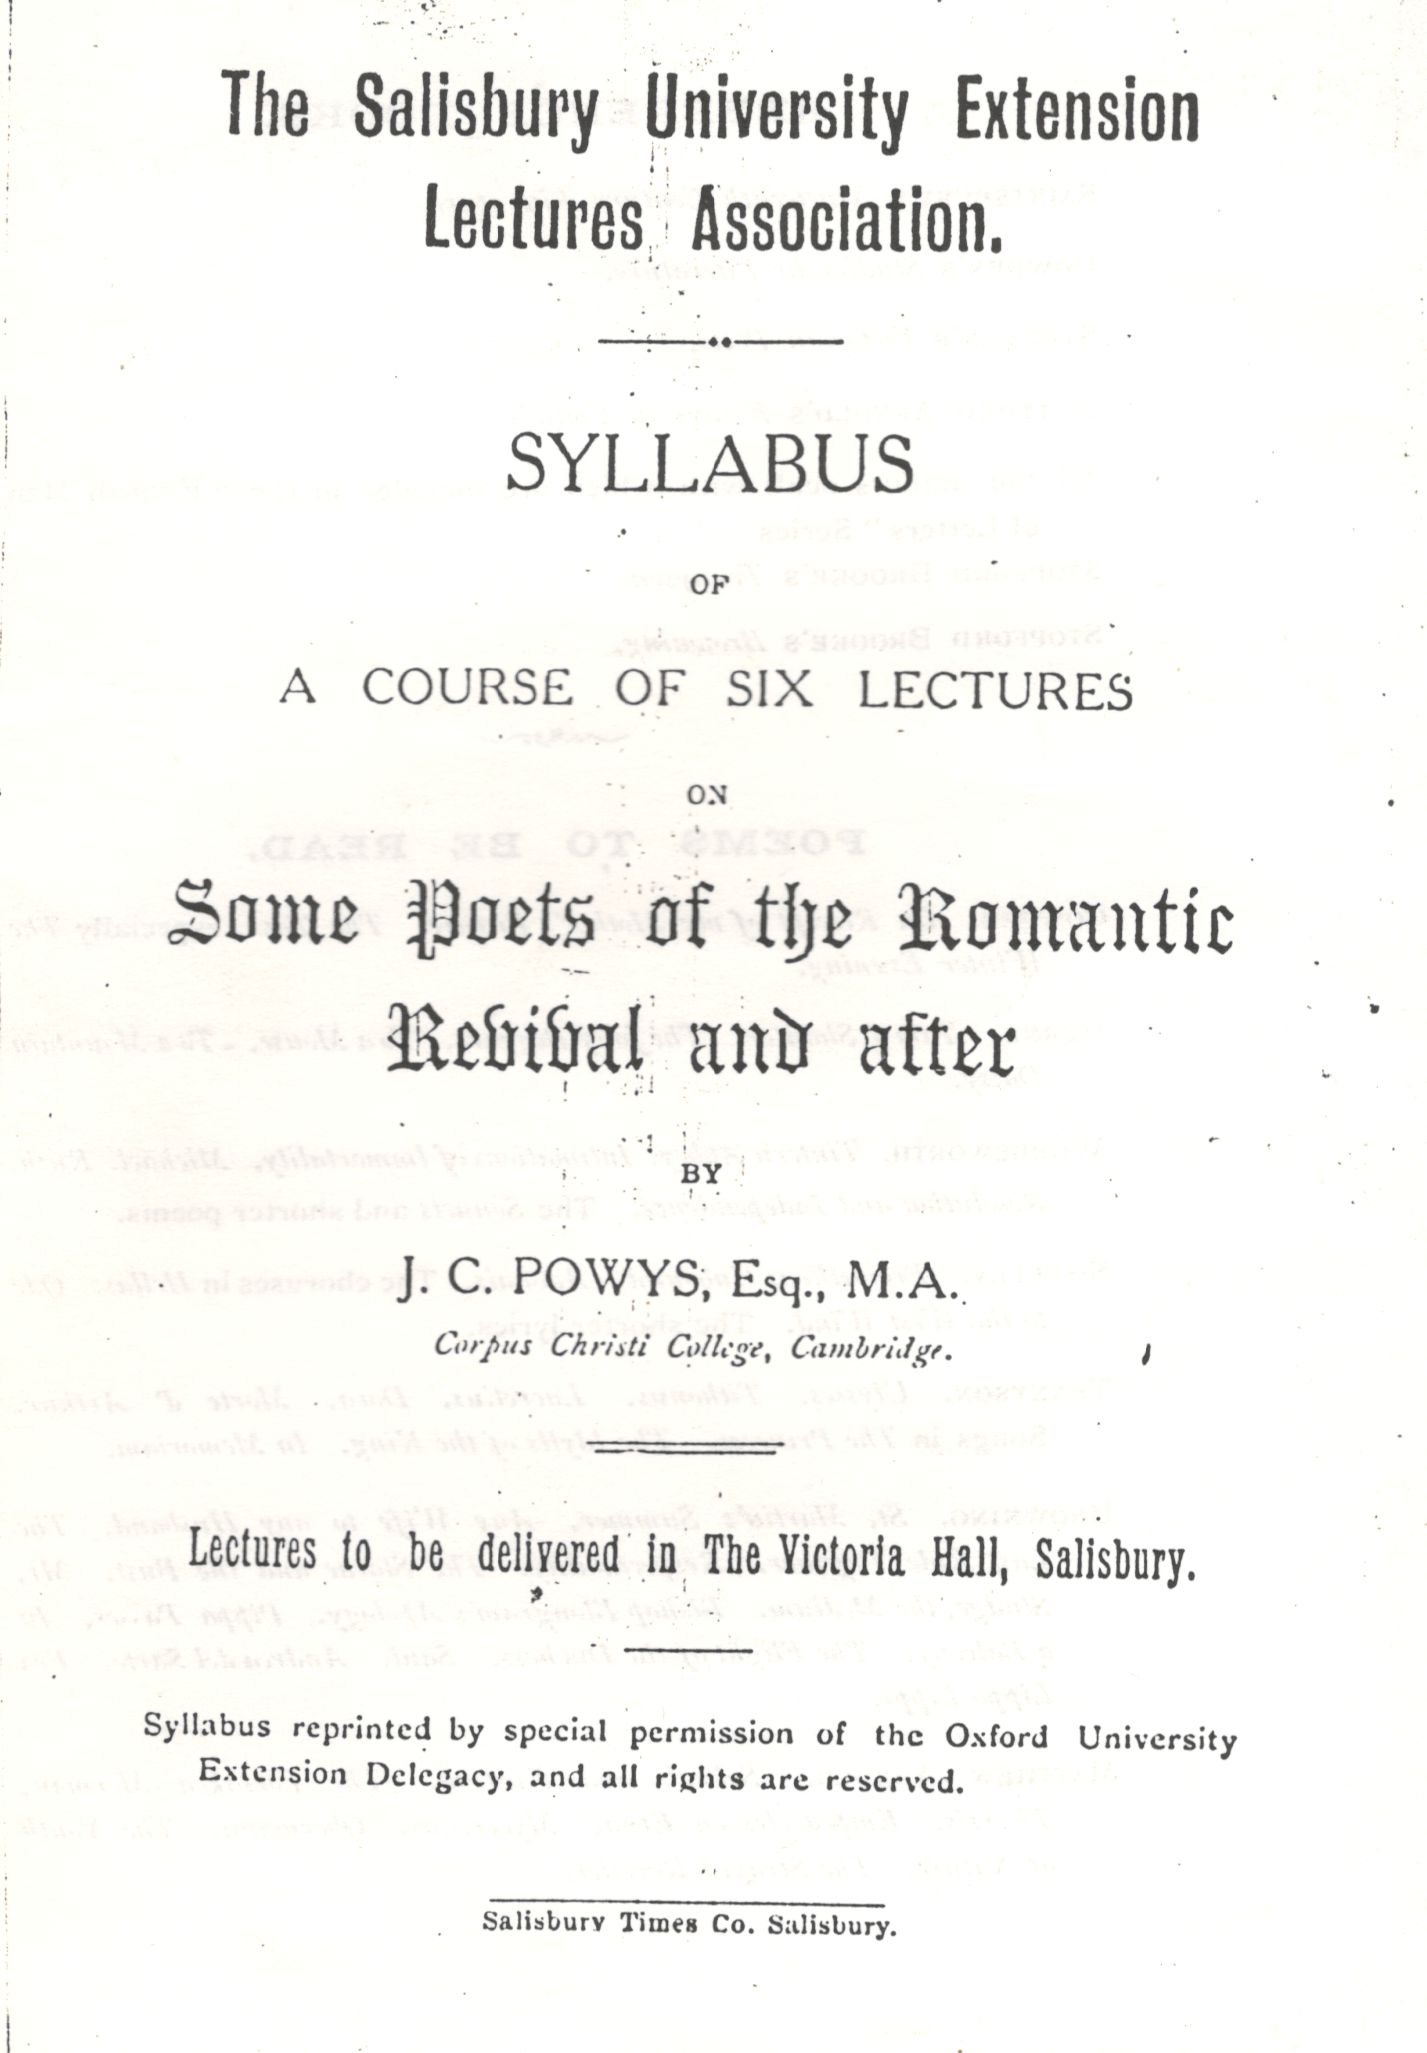 Syllabus of a Course of Six Lectures: Title Page